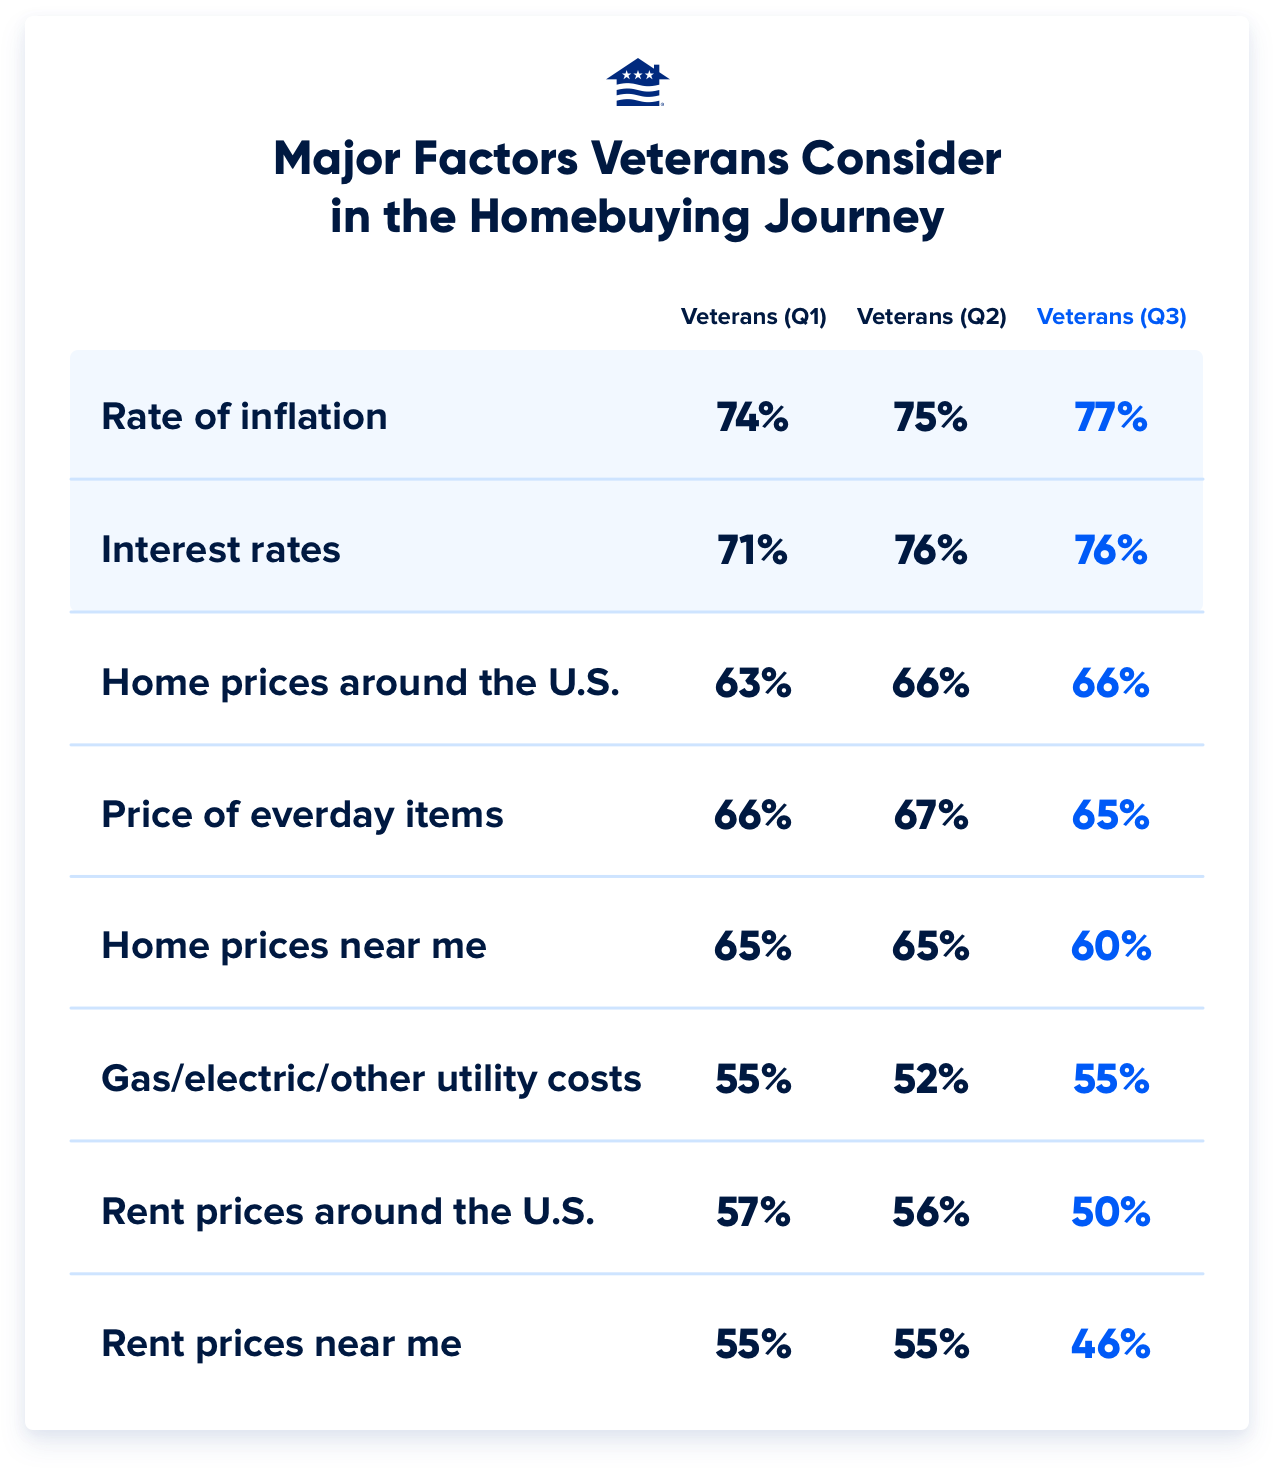 Major Factor Summary Veterans (Q1) Veterans (Q2) Veterans (Q3) Rate of inflation 74% 75% 77% Interest rates 71% 76% 76% Home prices around the U.S. 63% 66% 66% Prices of everyday items 66% 67% 65% Home prices near me 65% 65% 60% Gas/Electric/other utility costs 55% 52% 55% Rent prices around the U.S. 57% 56% 50% Rent prices near me 55% 55% 46%